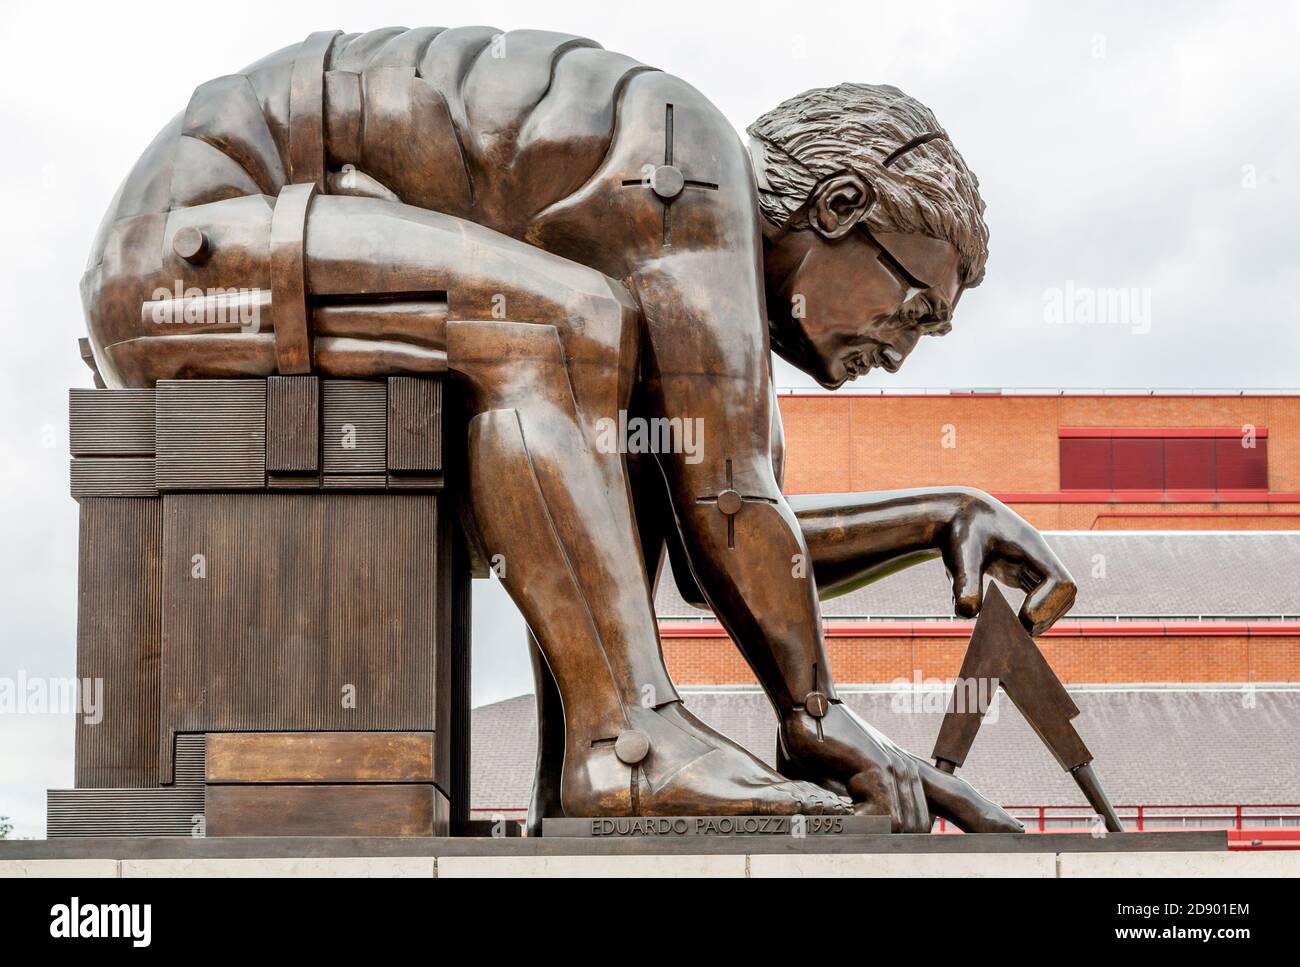 Eduardo Paolozzi's bronze sculpture of Newton at British Museum London embodying his Laws of Motion Theories of Gravity Light & Mathematical Calculus Stock Photo